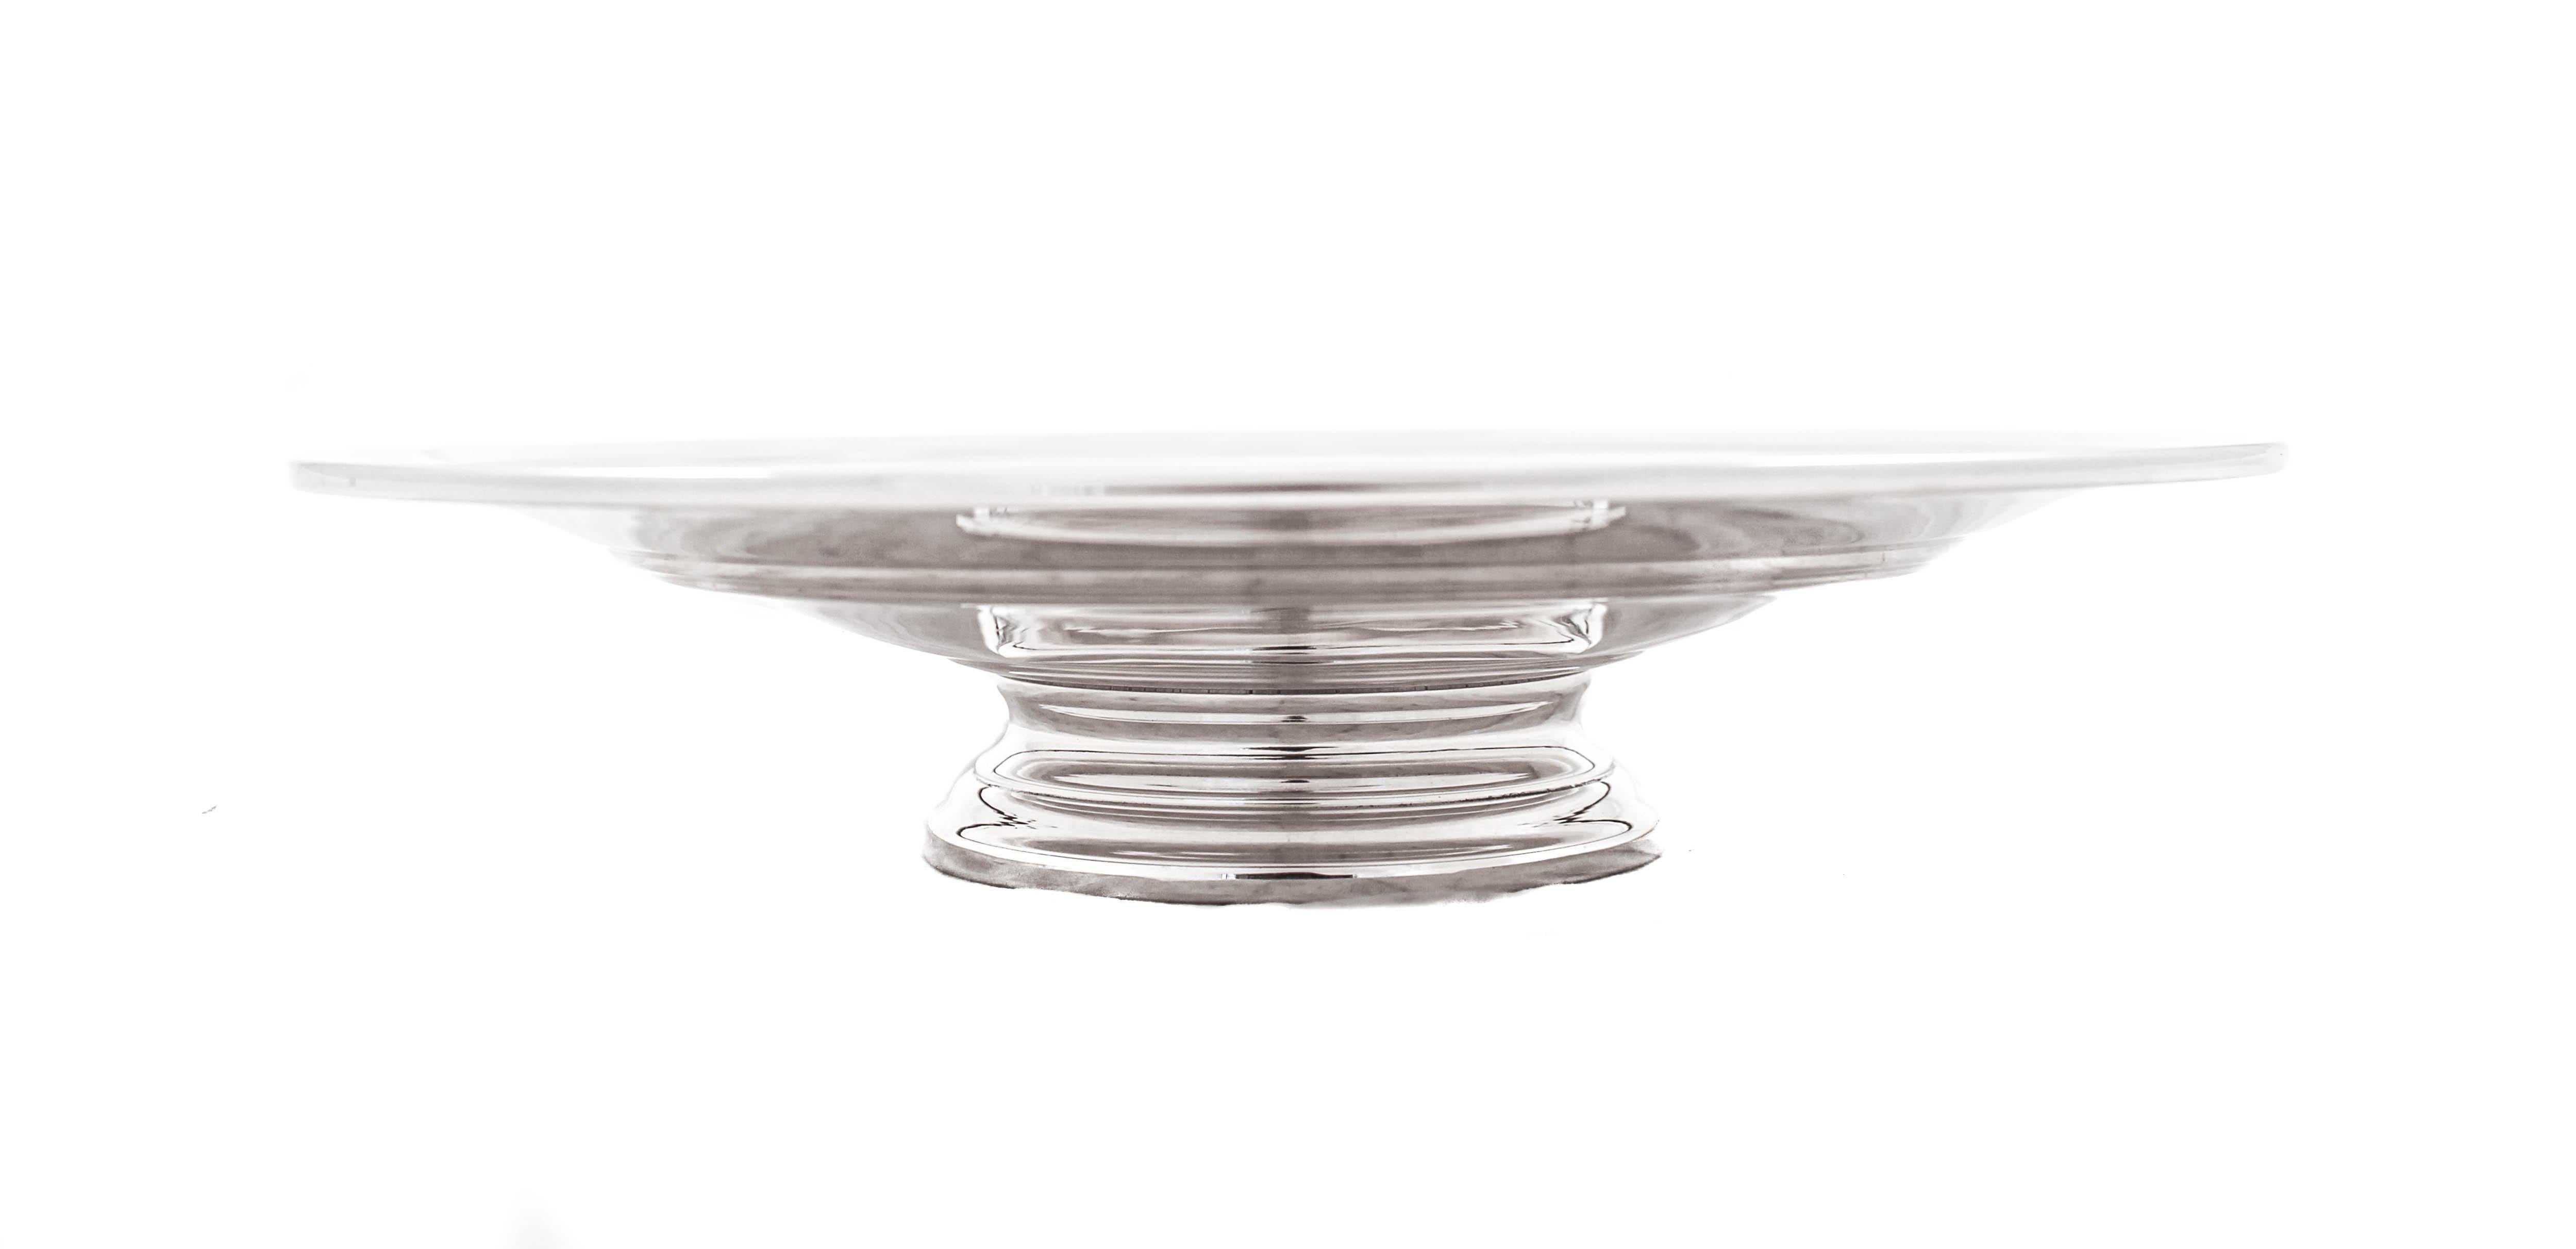 We are offering this sterling silver midcentury bowl. If less is more than this is for you. Standing on a pedestal this bowl has no etchings or decoration. Just a few ridges along the circumference give it a more modern style. The bowl is not too